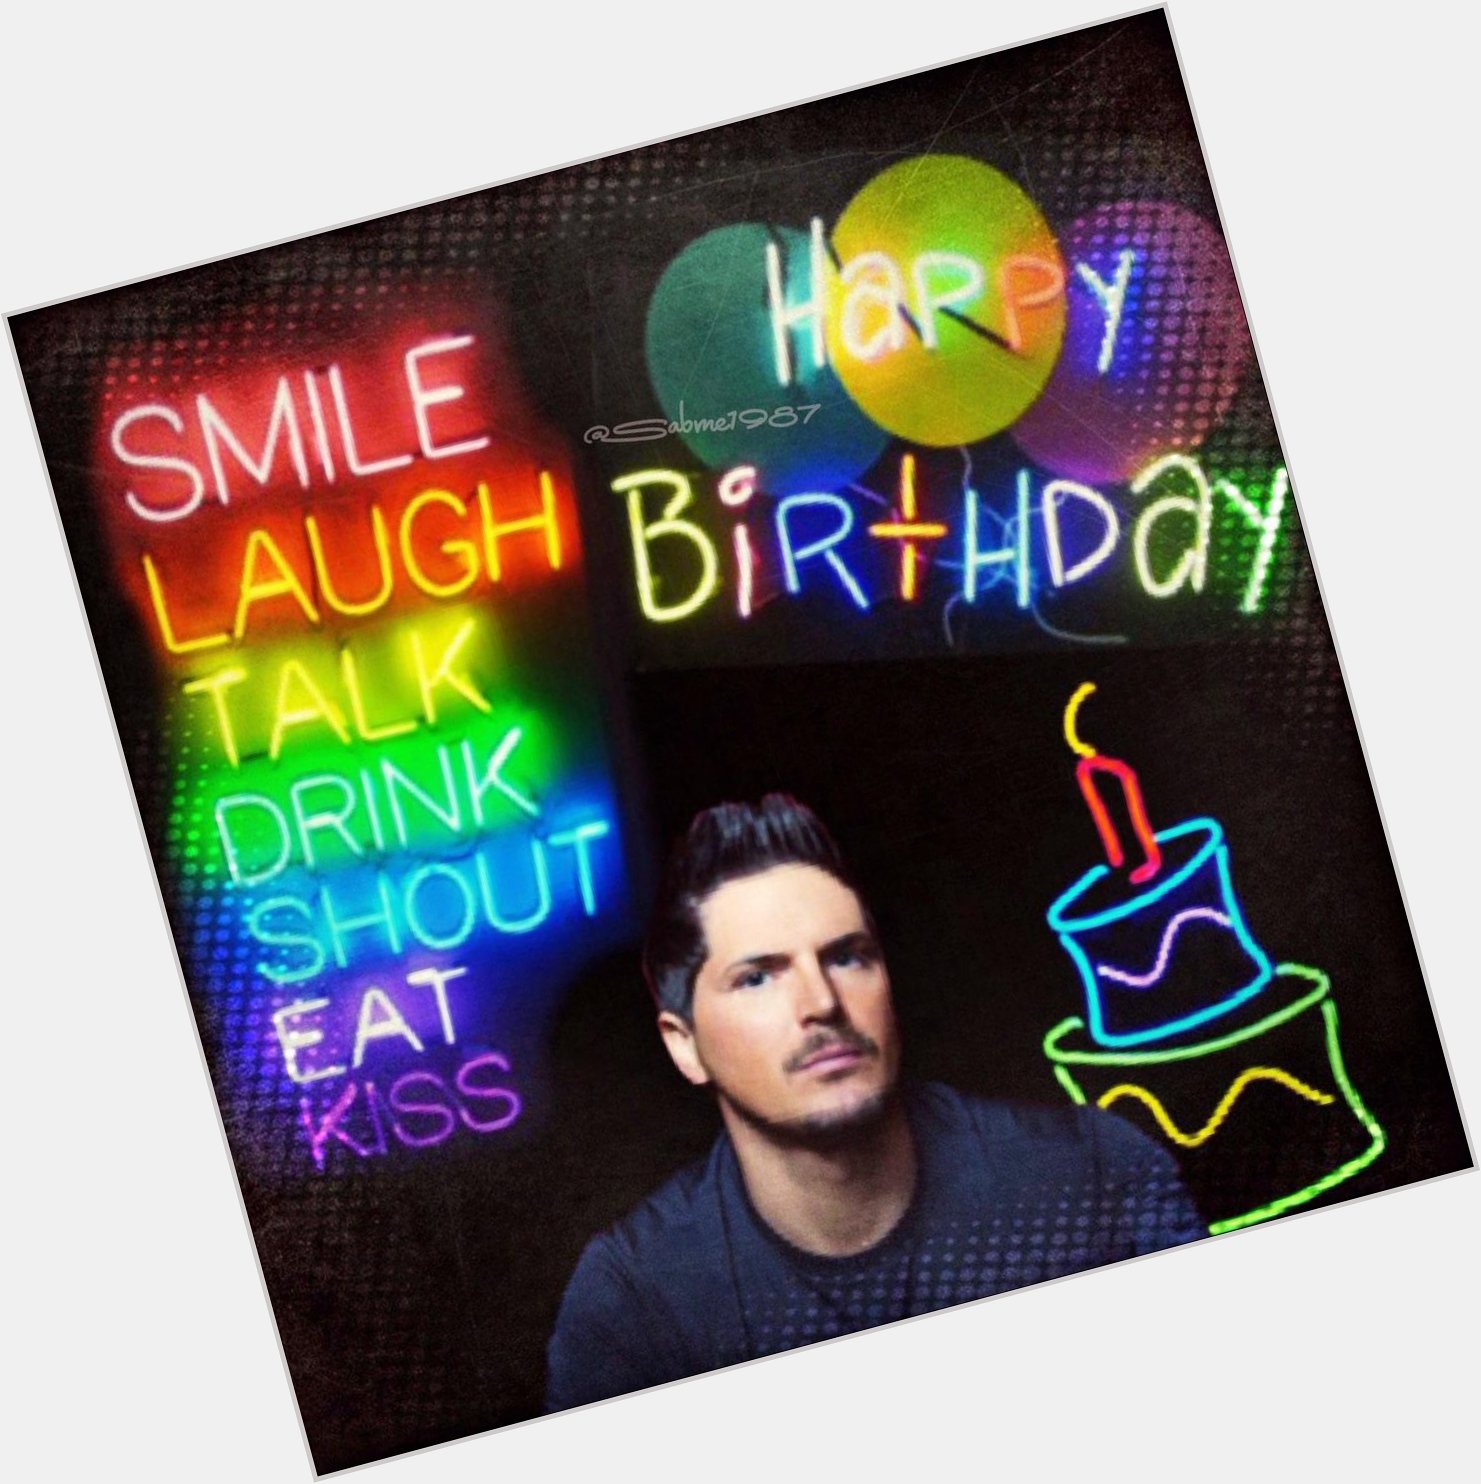 Happy birthday . Hope you\re having a wonderful birthday today. Much love from denmark         